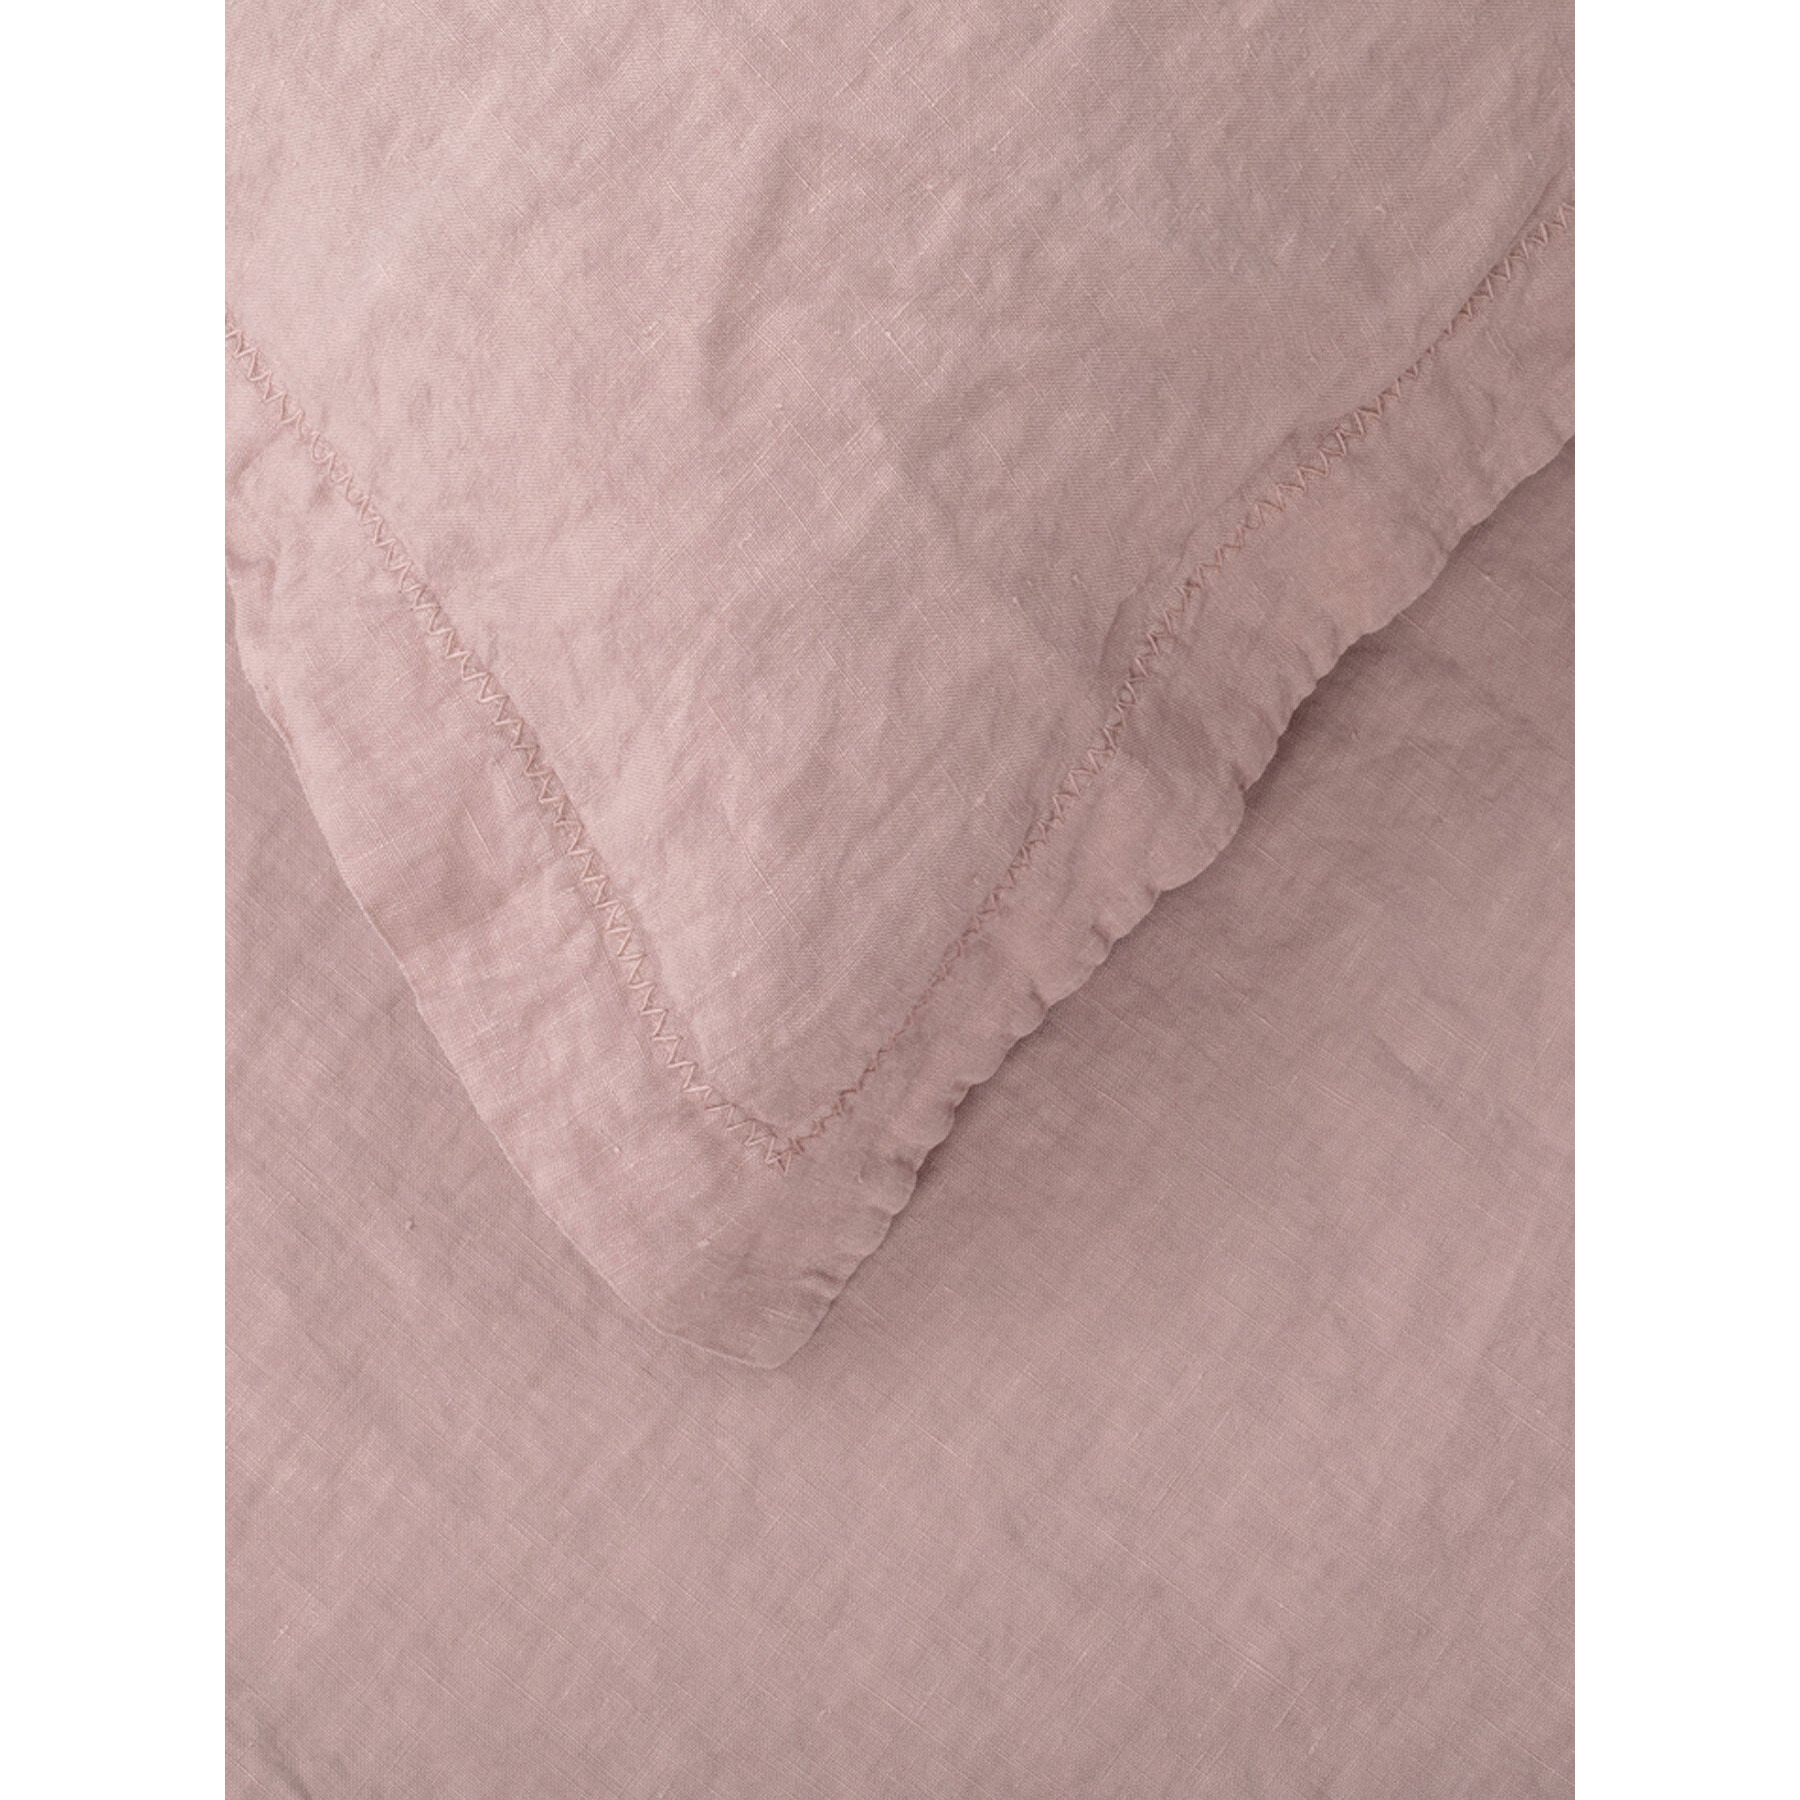 Heal's Washed Linen Fitted Sheet - Size Super King Pink - image 1